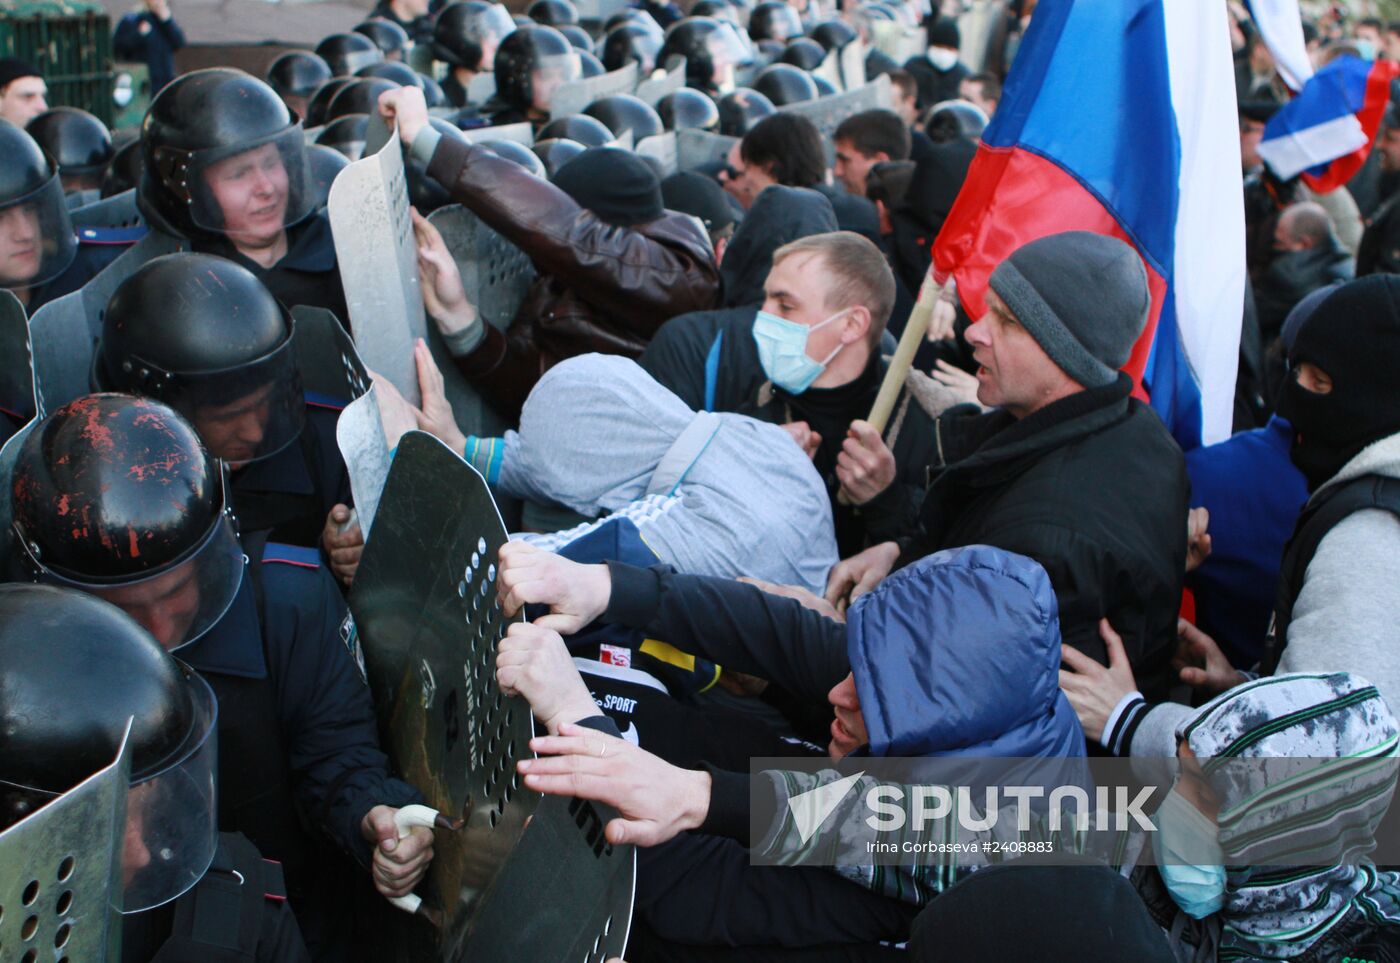 Supporters of referendum on Donetsk Region's status stage rally